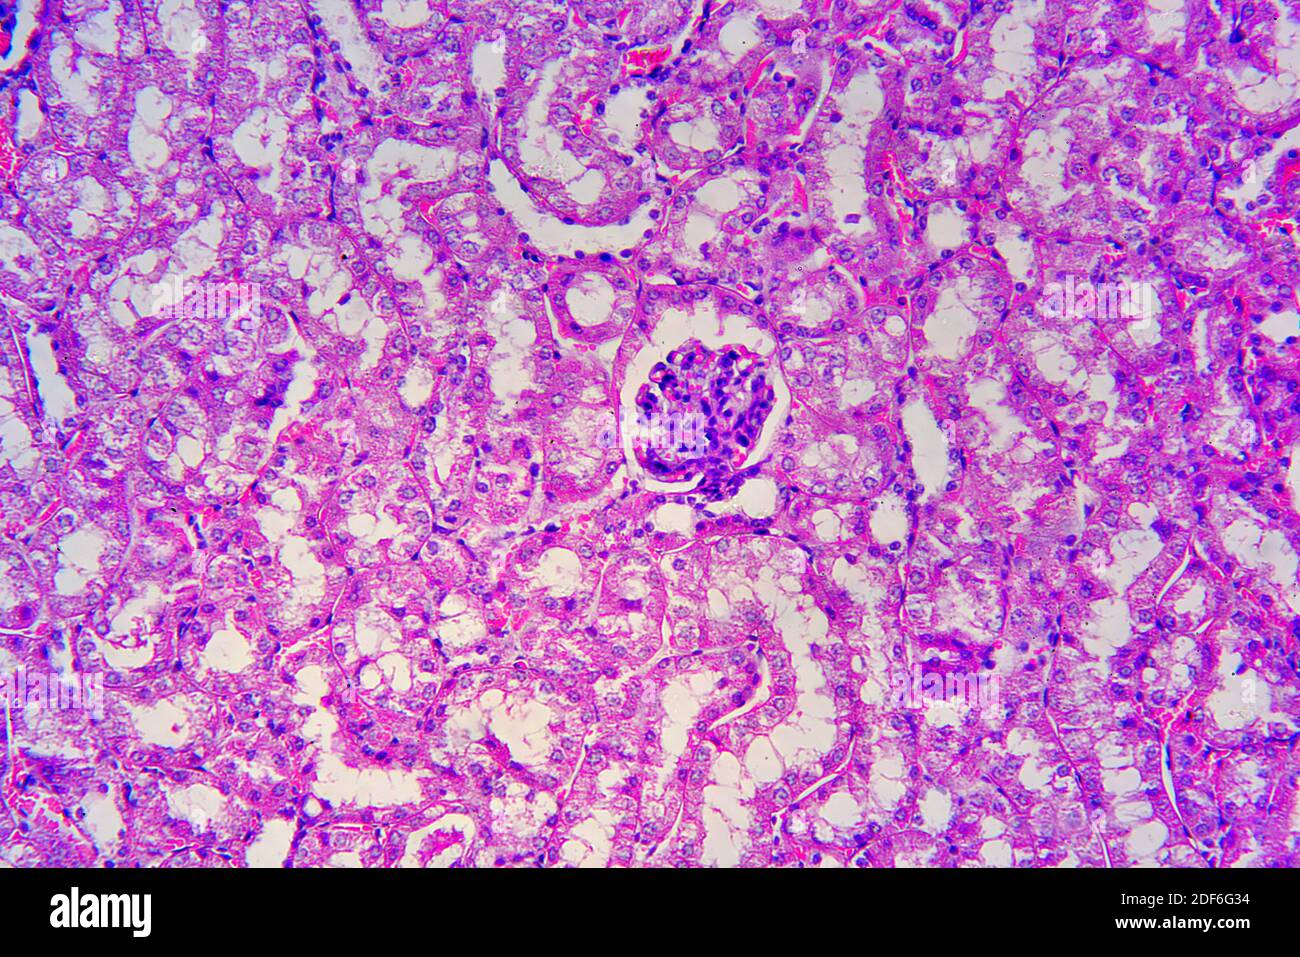 Kidney section showing nephrons, Bowman capsules, glomerulus and distal and proximal tubules. Optical microscope X200. Stock Photo